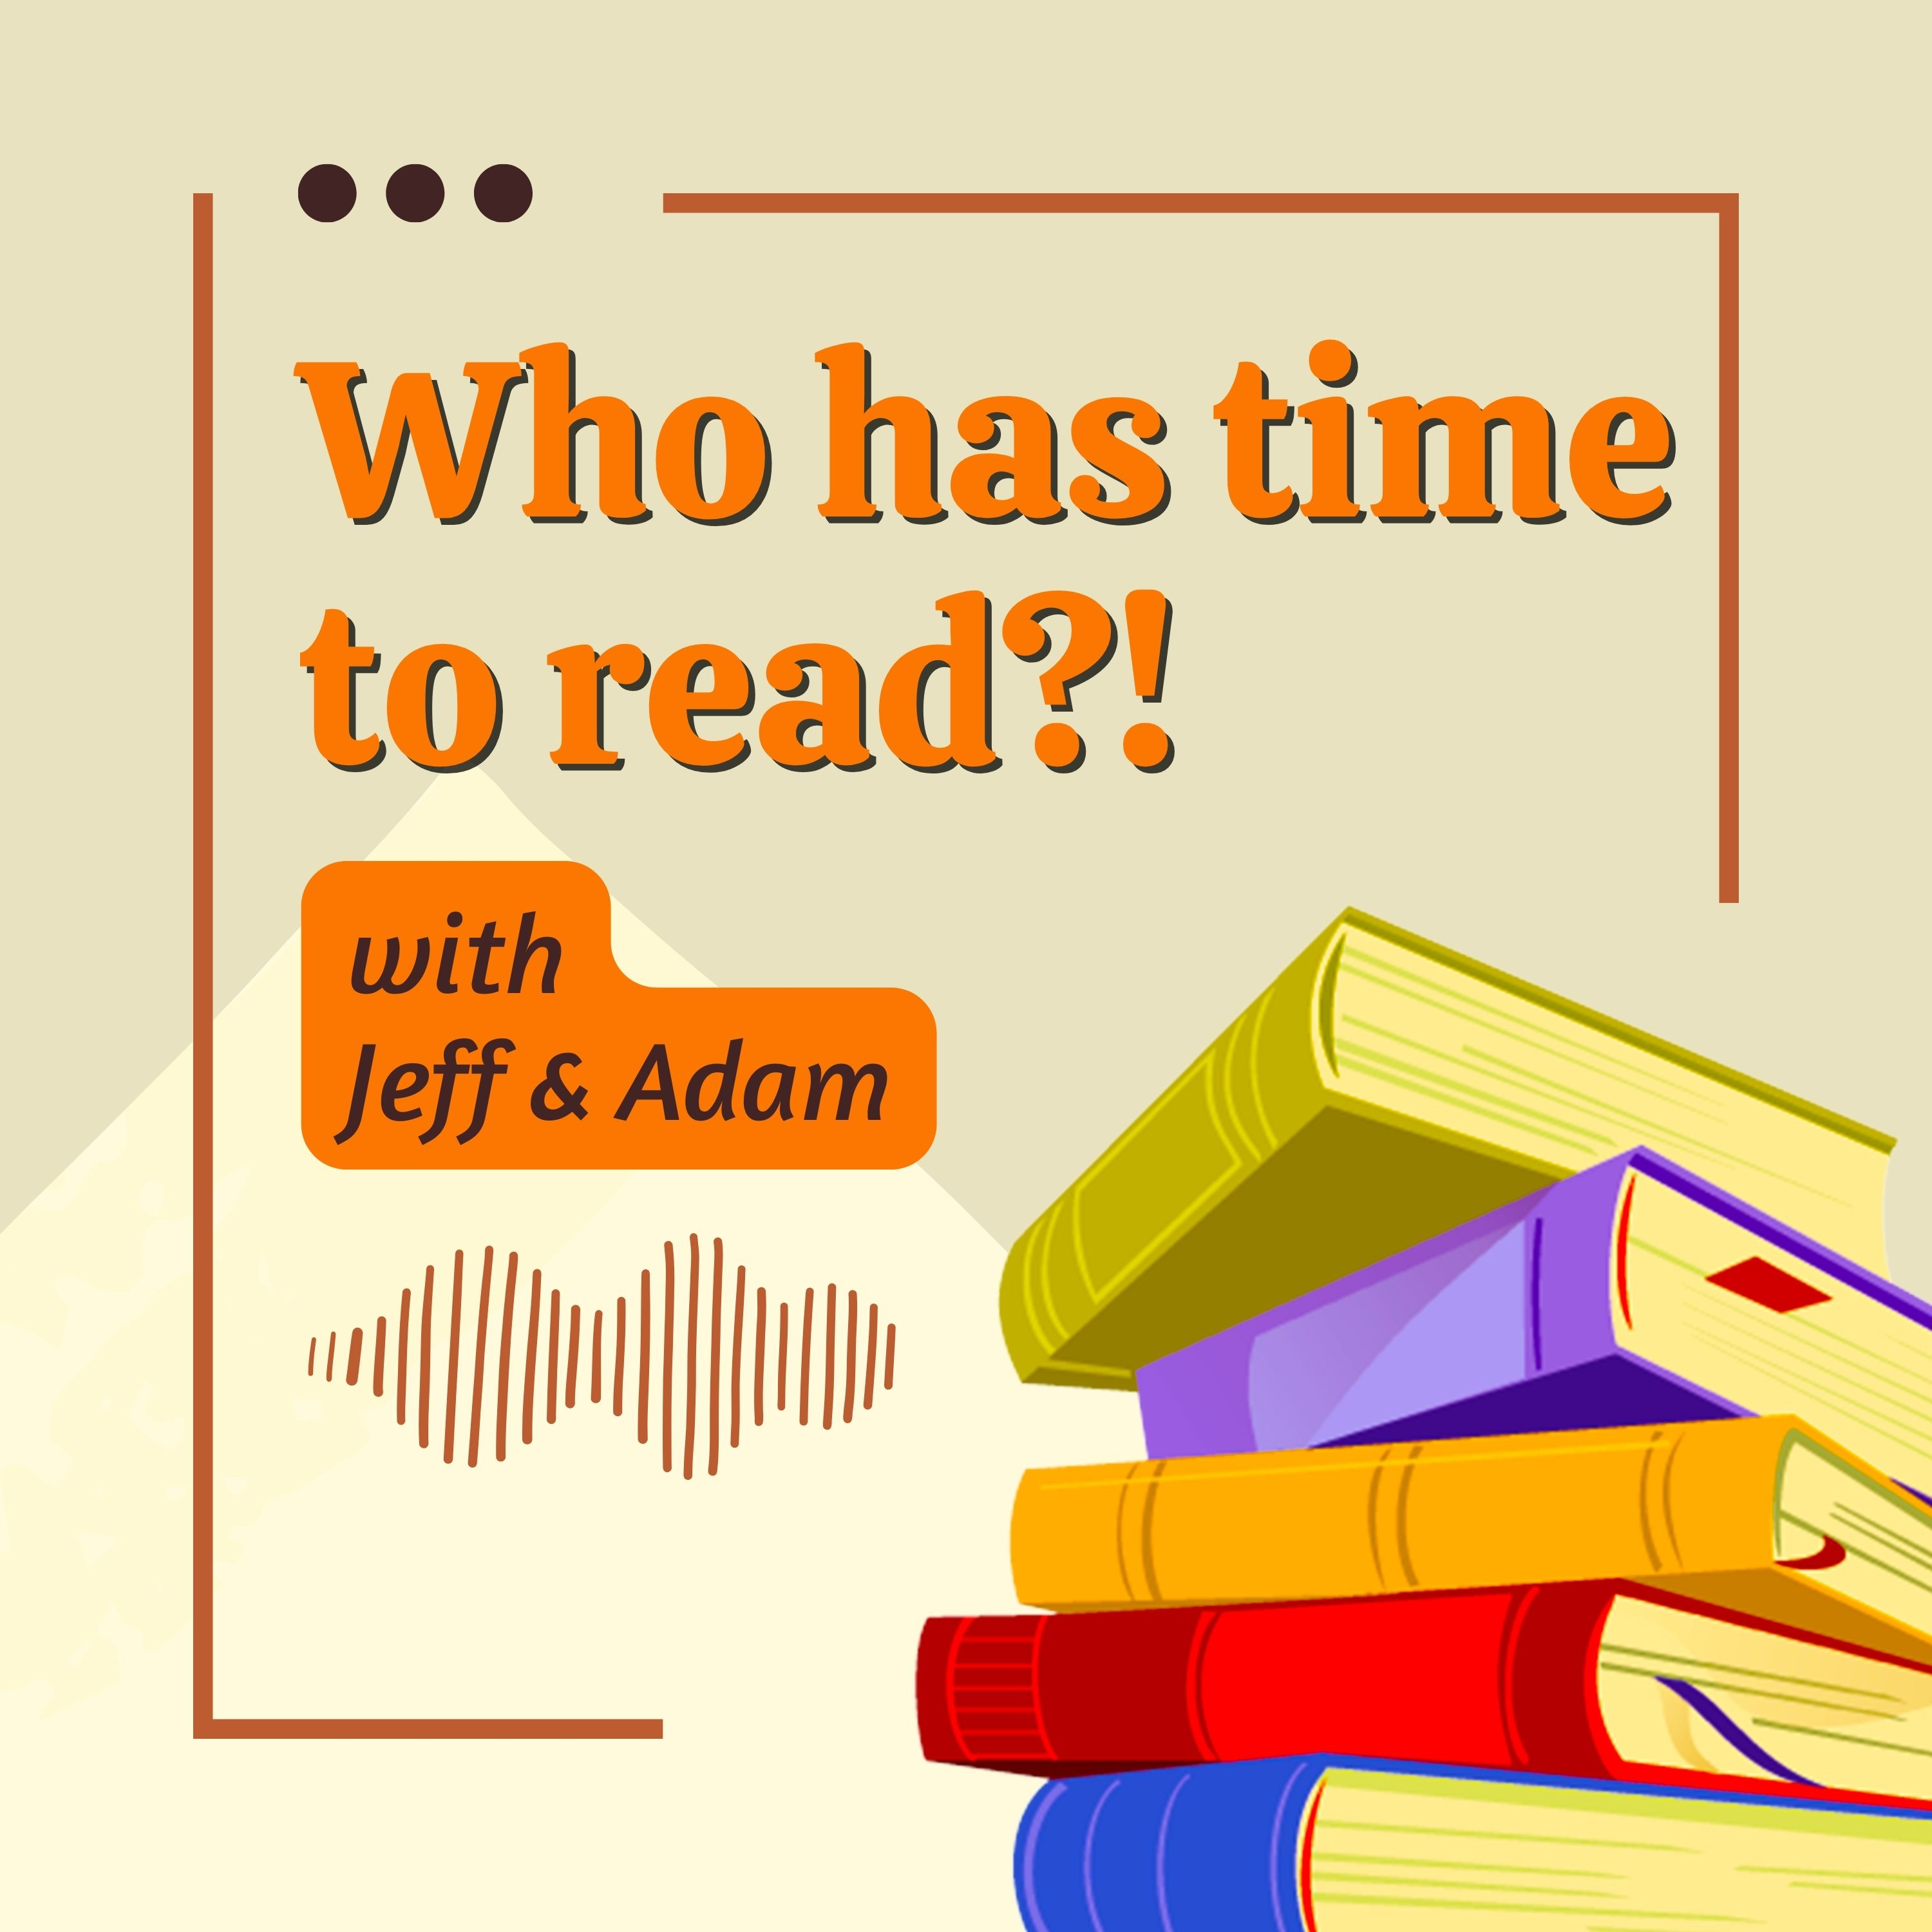 Who has time to read?!